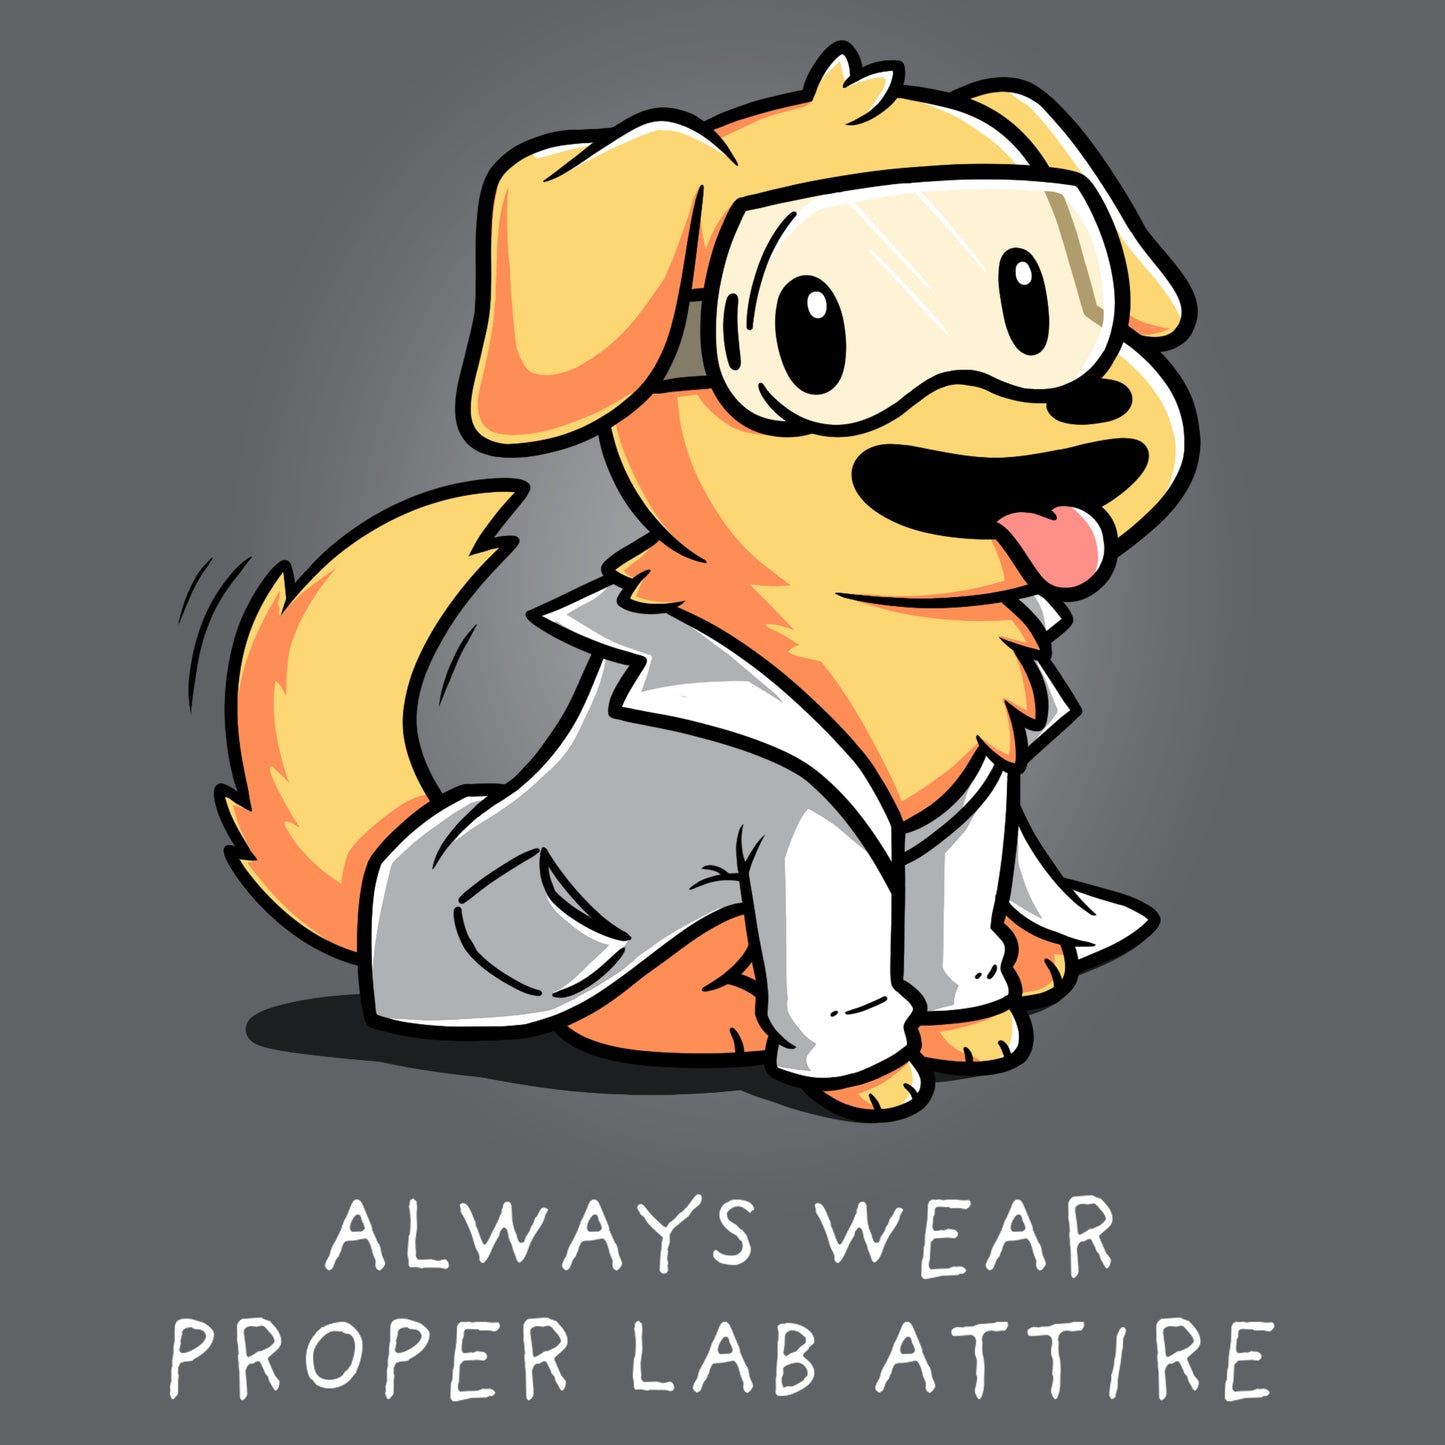 A dog wearing a lab coat with the words always wear proper TeeTurtle Lab Attire.